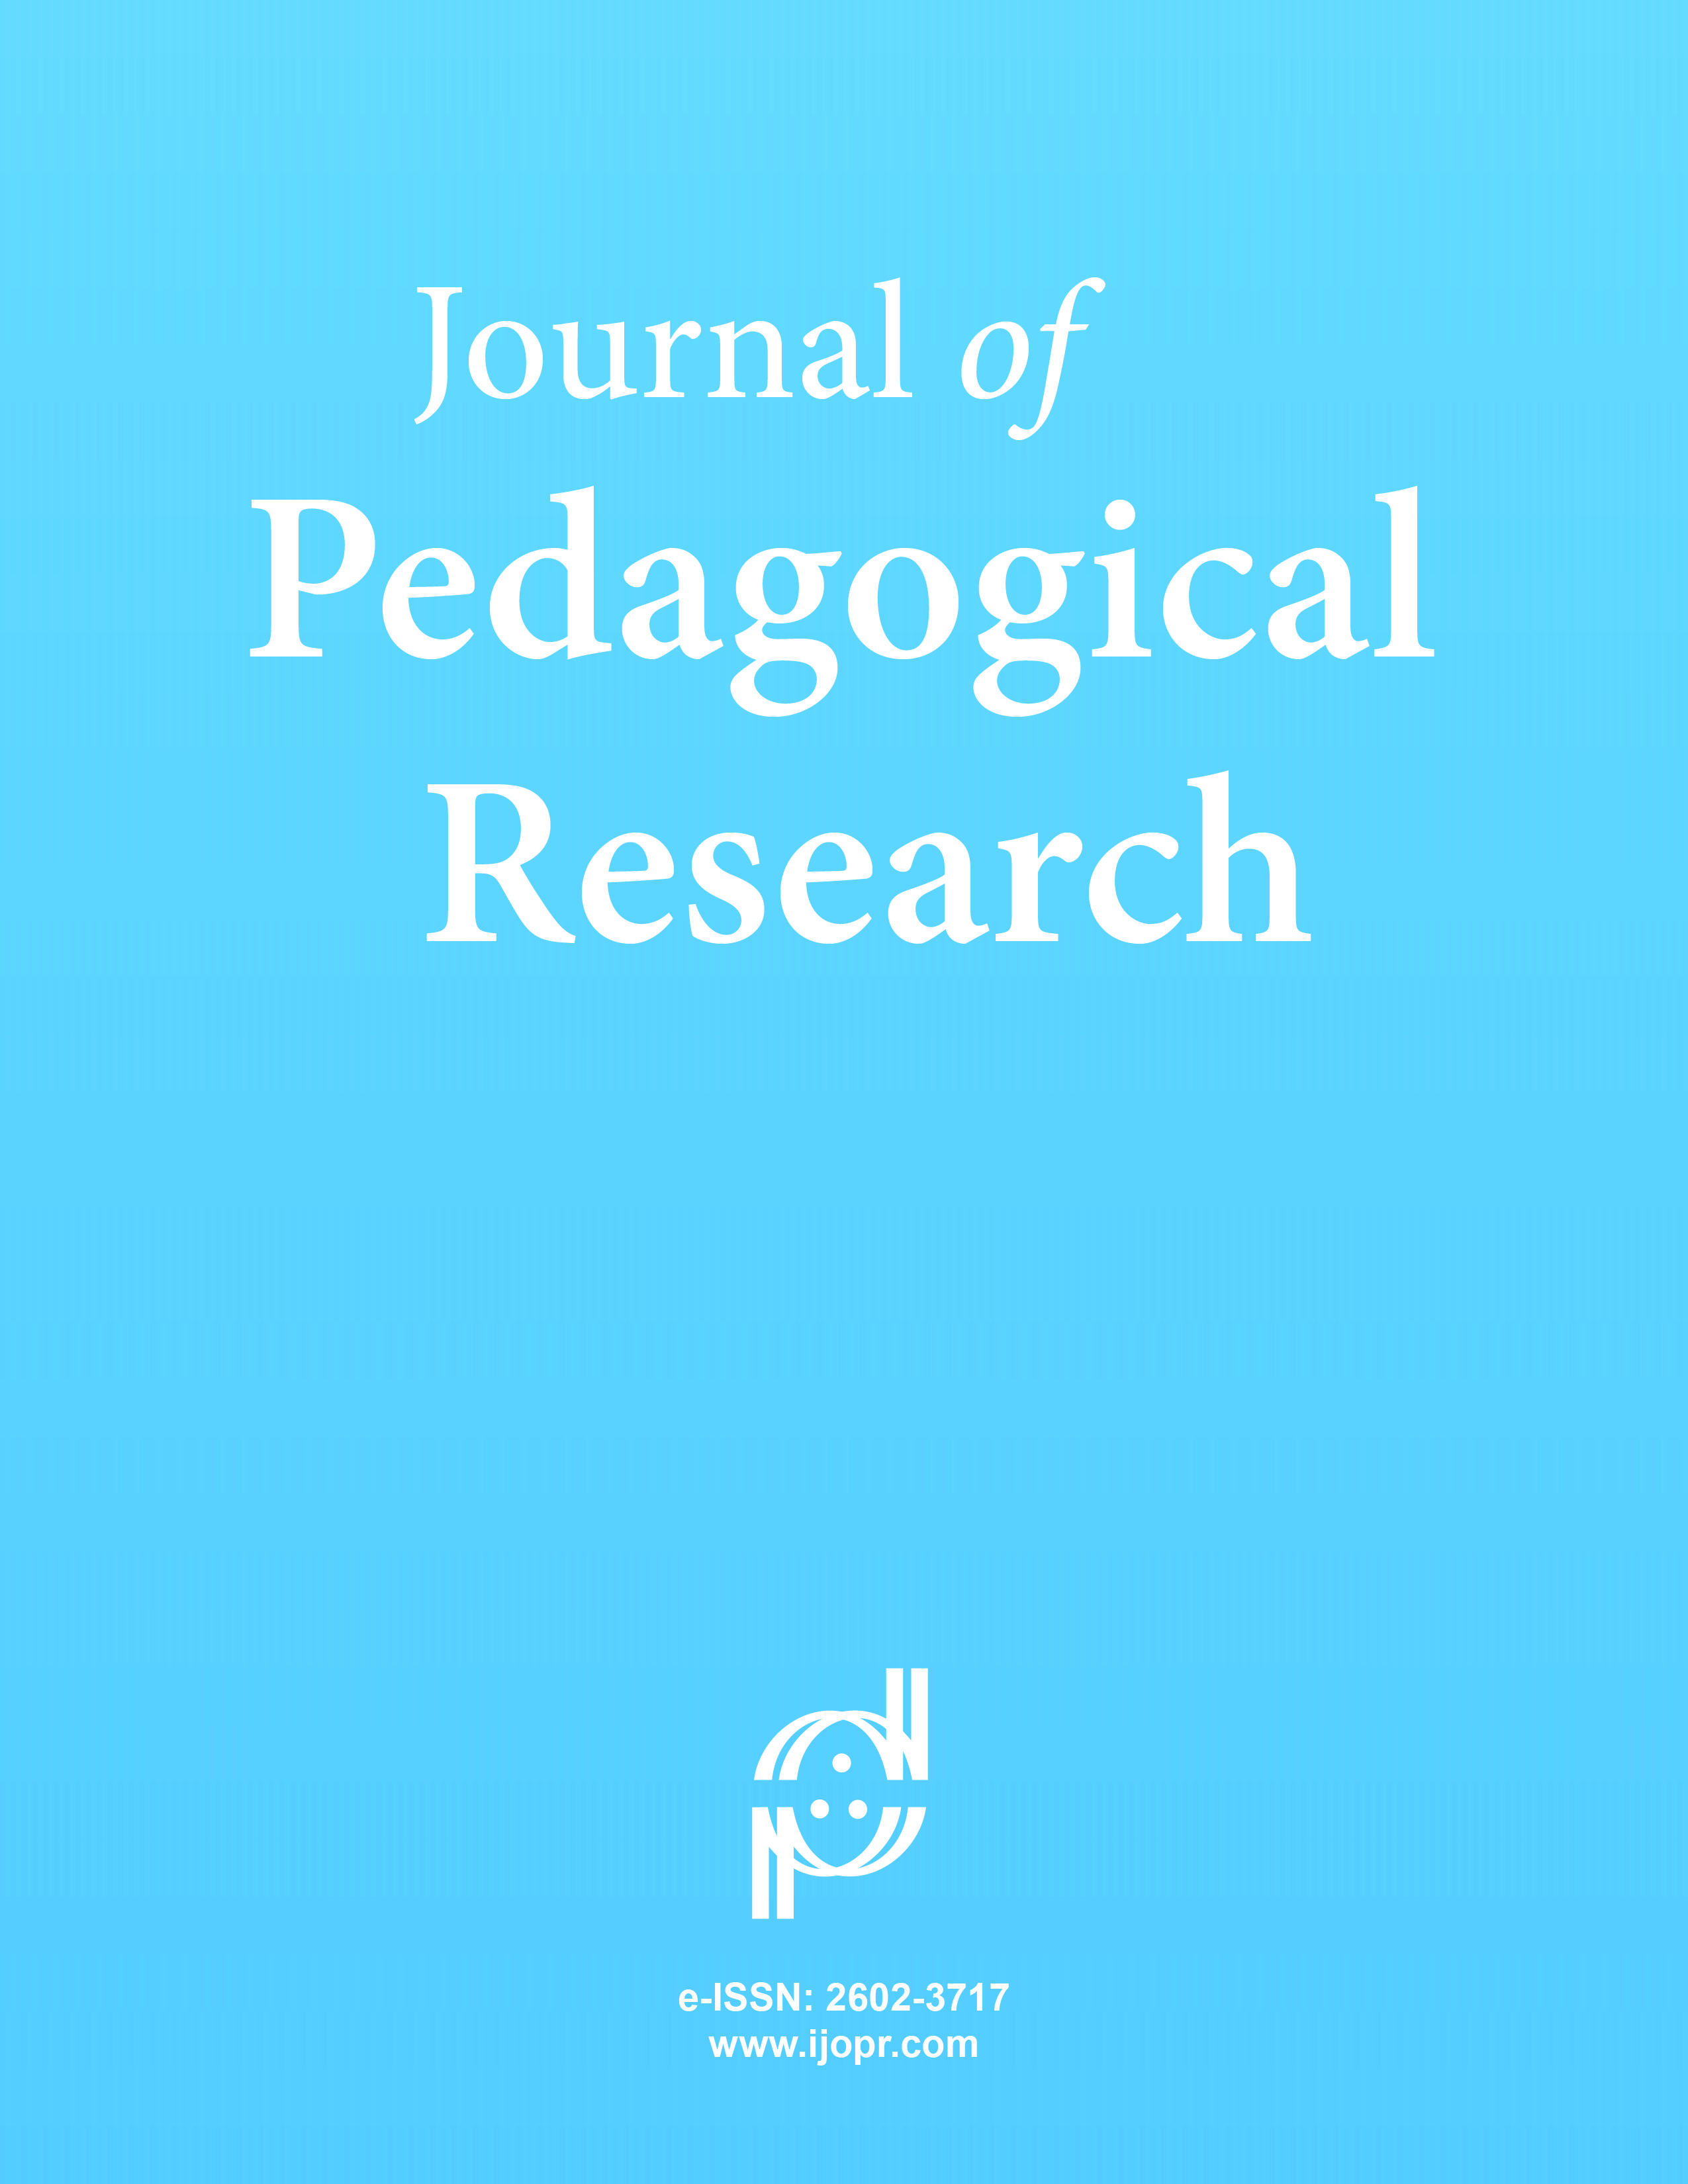 Journal of Pedagogical Research